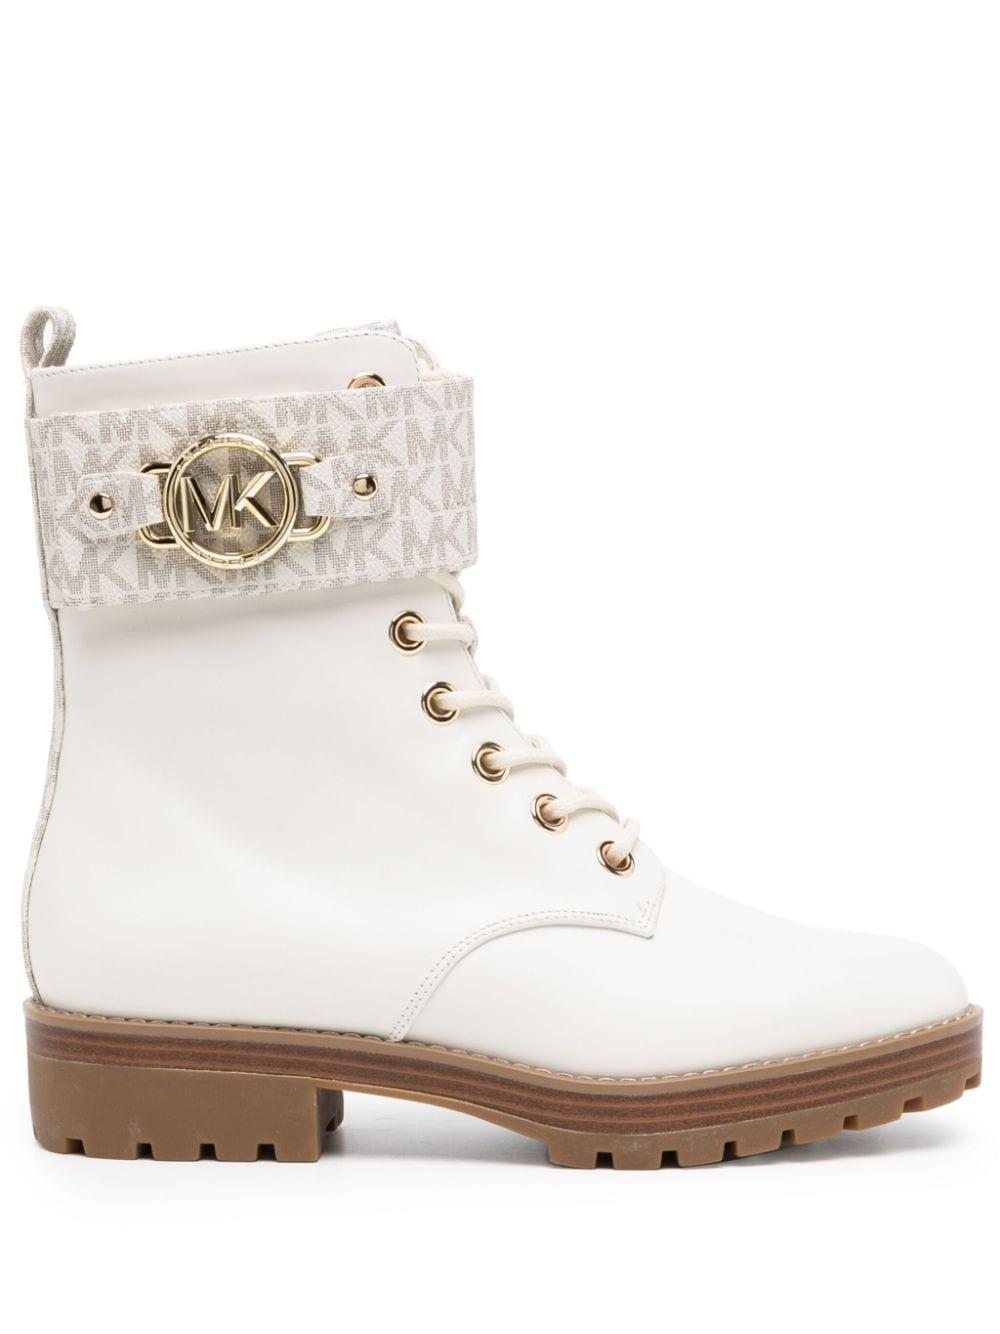 Michael Kors Rory Logo-plaque Boots in Natural | Lyst